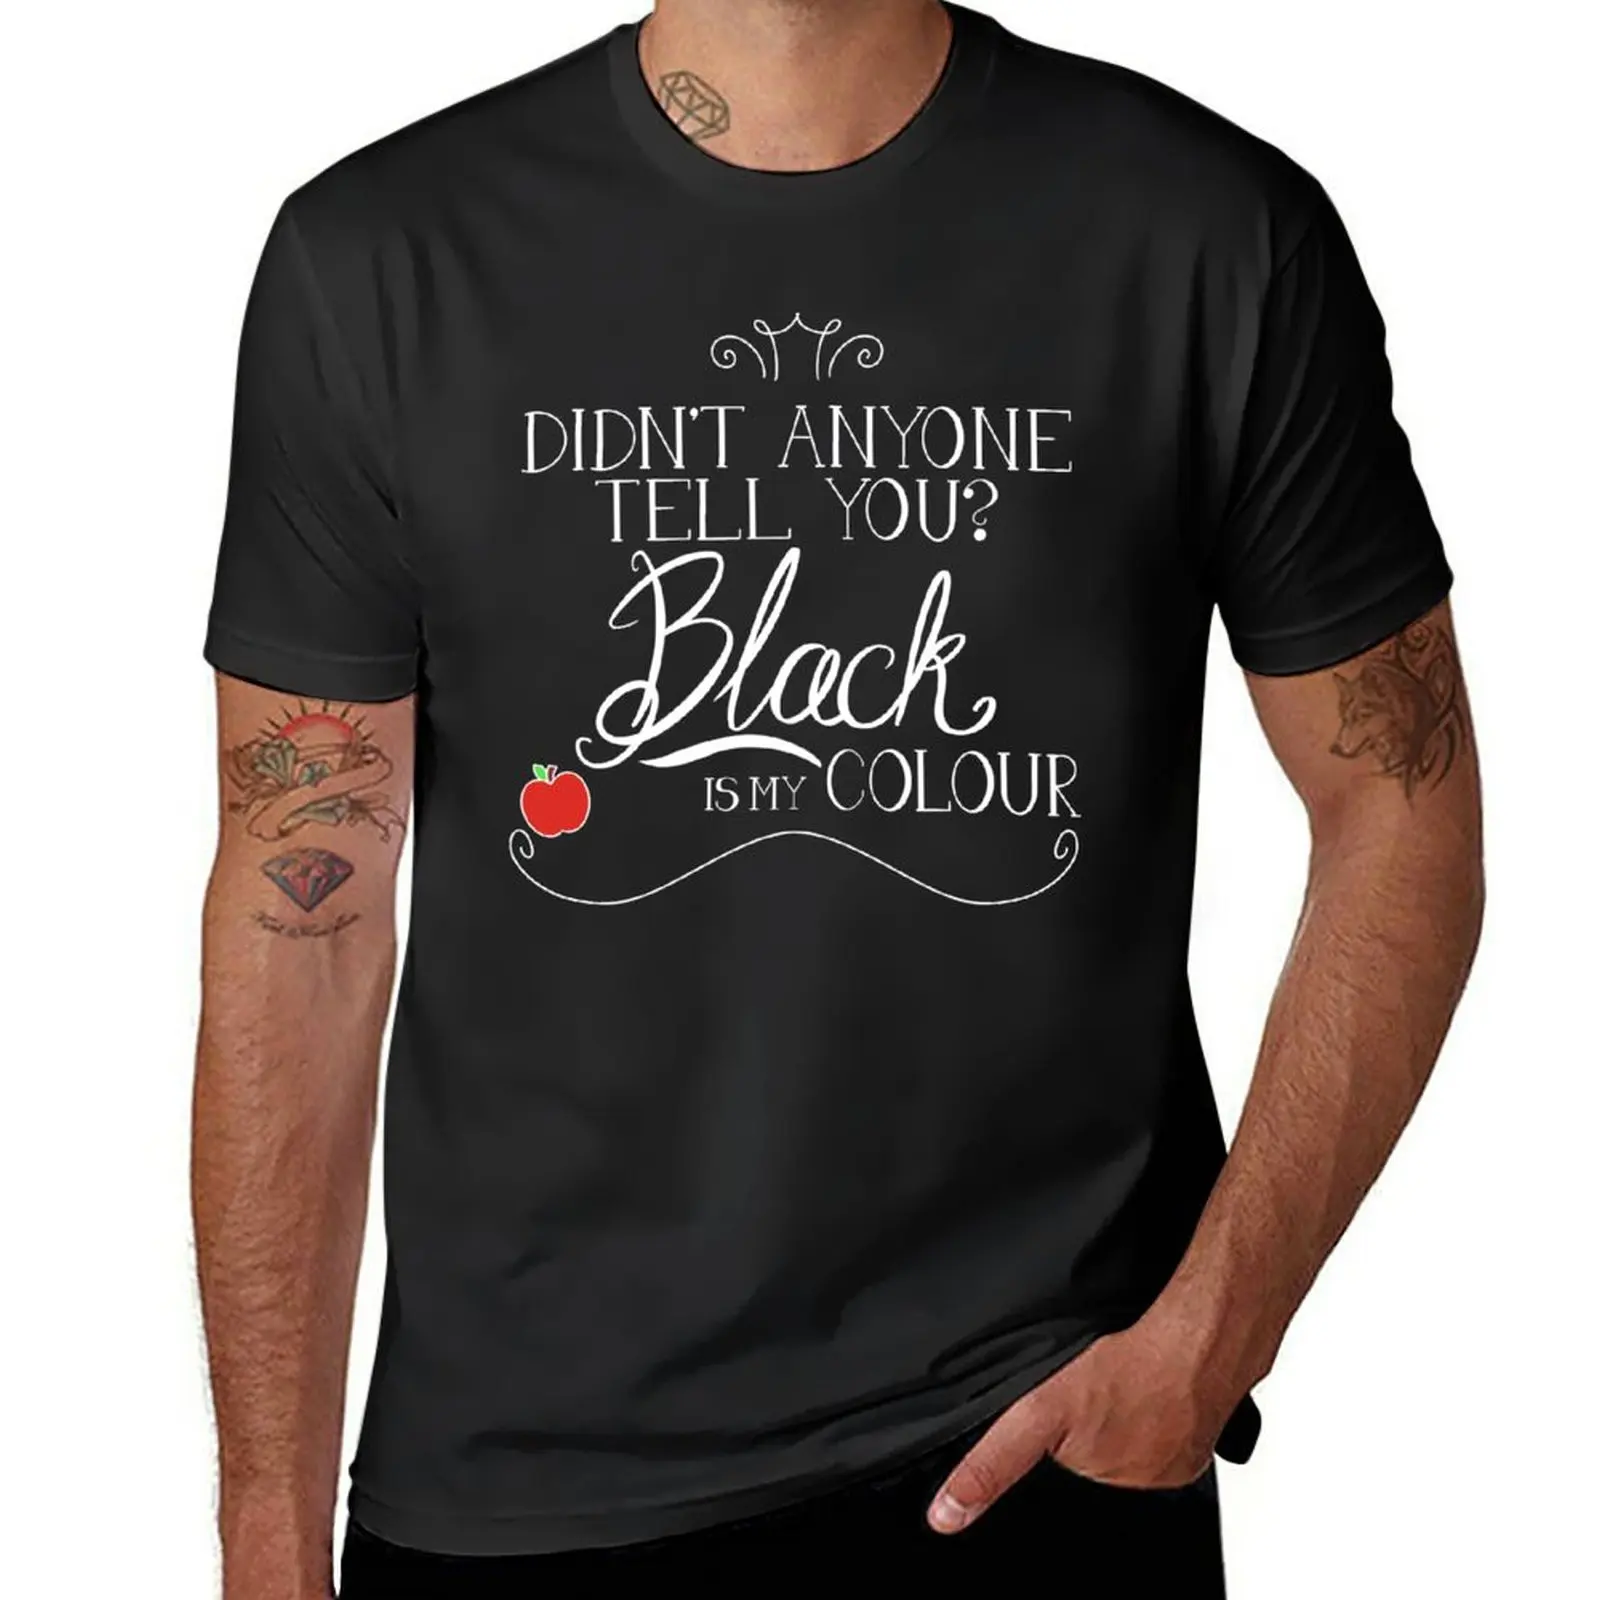 

Black is my colour (white font, English spelling) T-Shirt for a boy customs sweat shirts, men